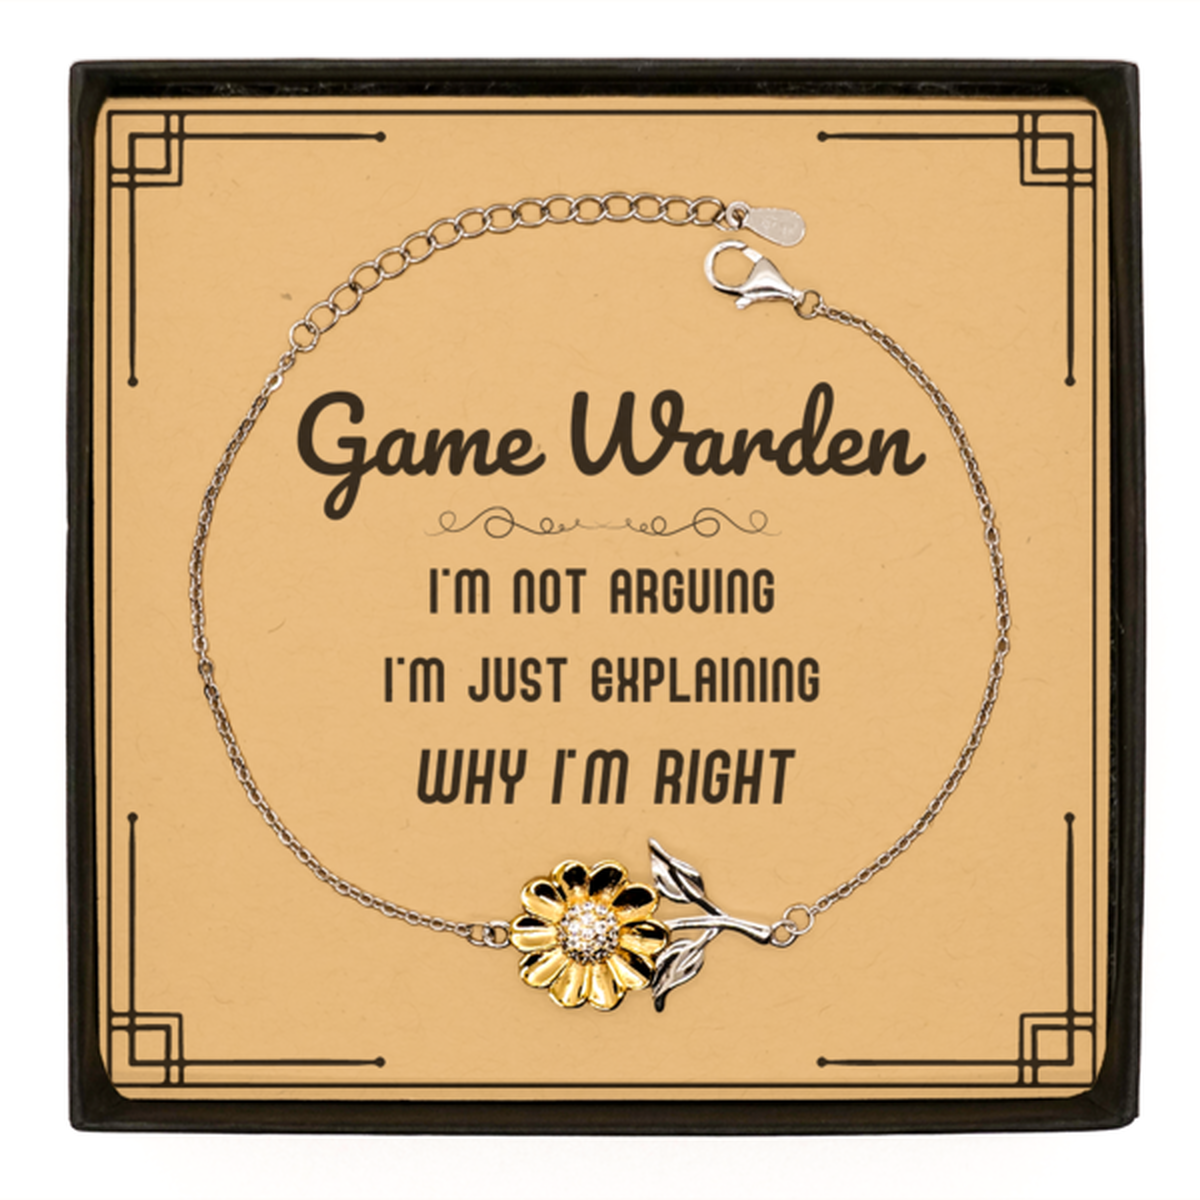 Game Warden I'm not Arguing. I'm Just Explaining Why I'm RIGHT Sunflower Bracelet, Funny Saying Quote Game Warden Gifts For Game Warden Message Card Graduation Birthday Christmas Gifts for Men Women Coworker